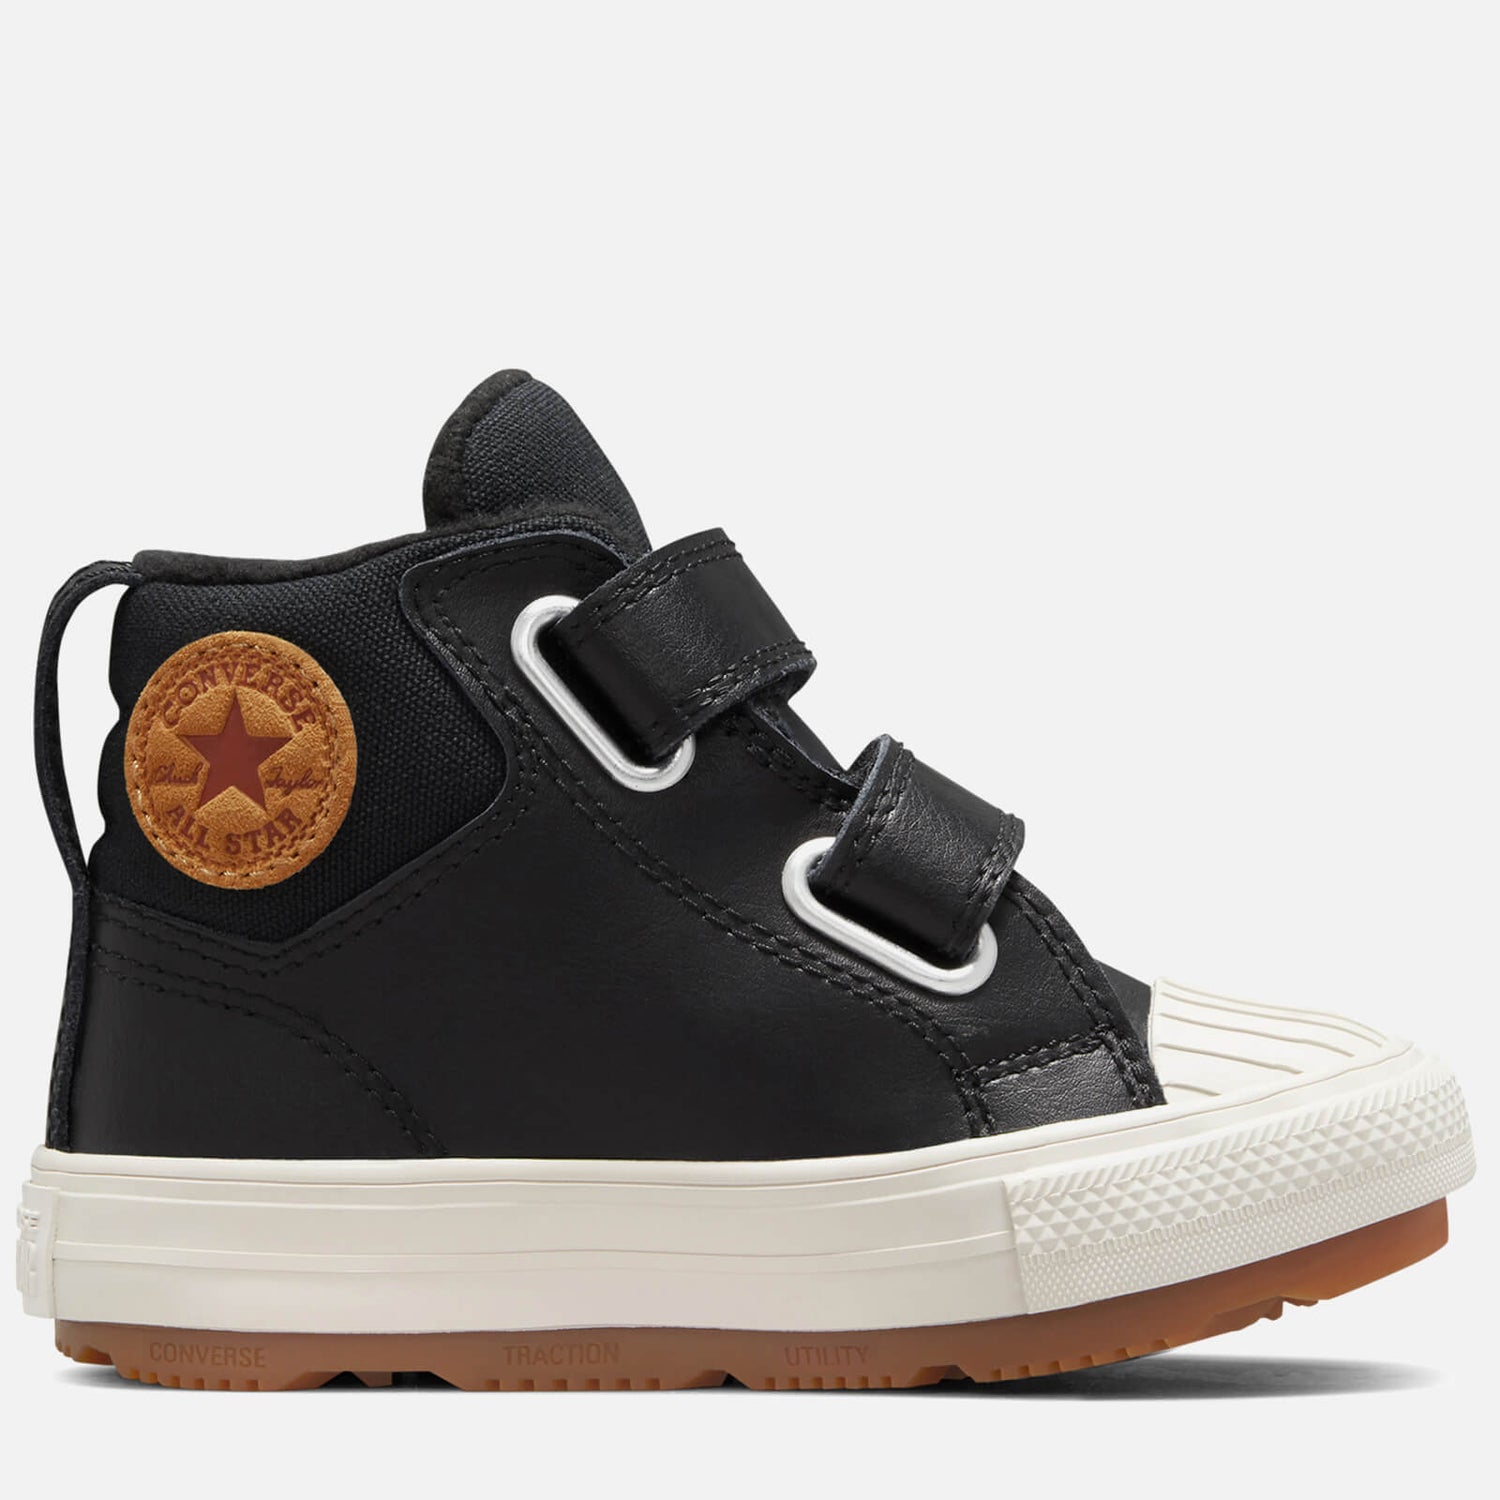 Converse Toddlers' Chuck Taylor All Star Berkshire Boot - Black/Pale Putty - UK 4 Baby